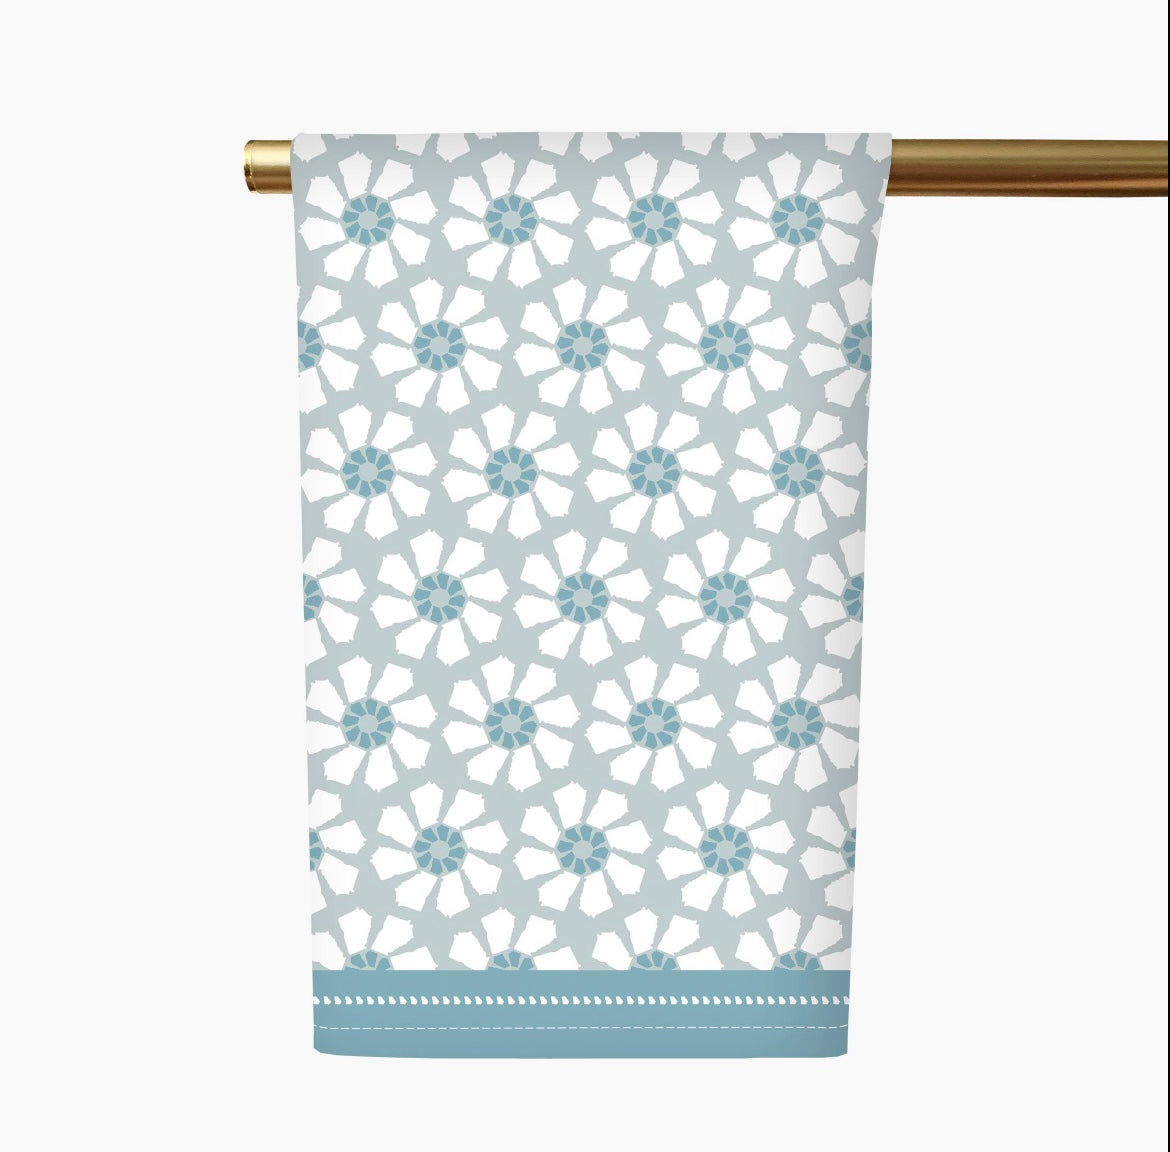 Tea Towels with TN and GA designs